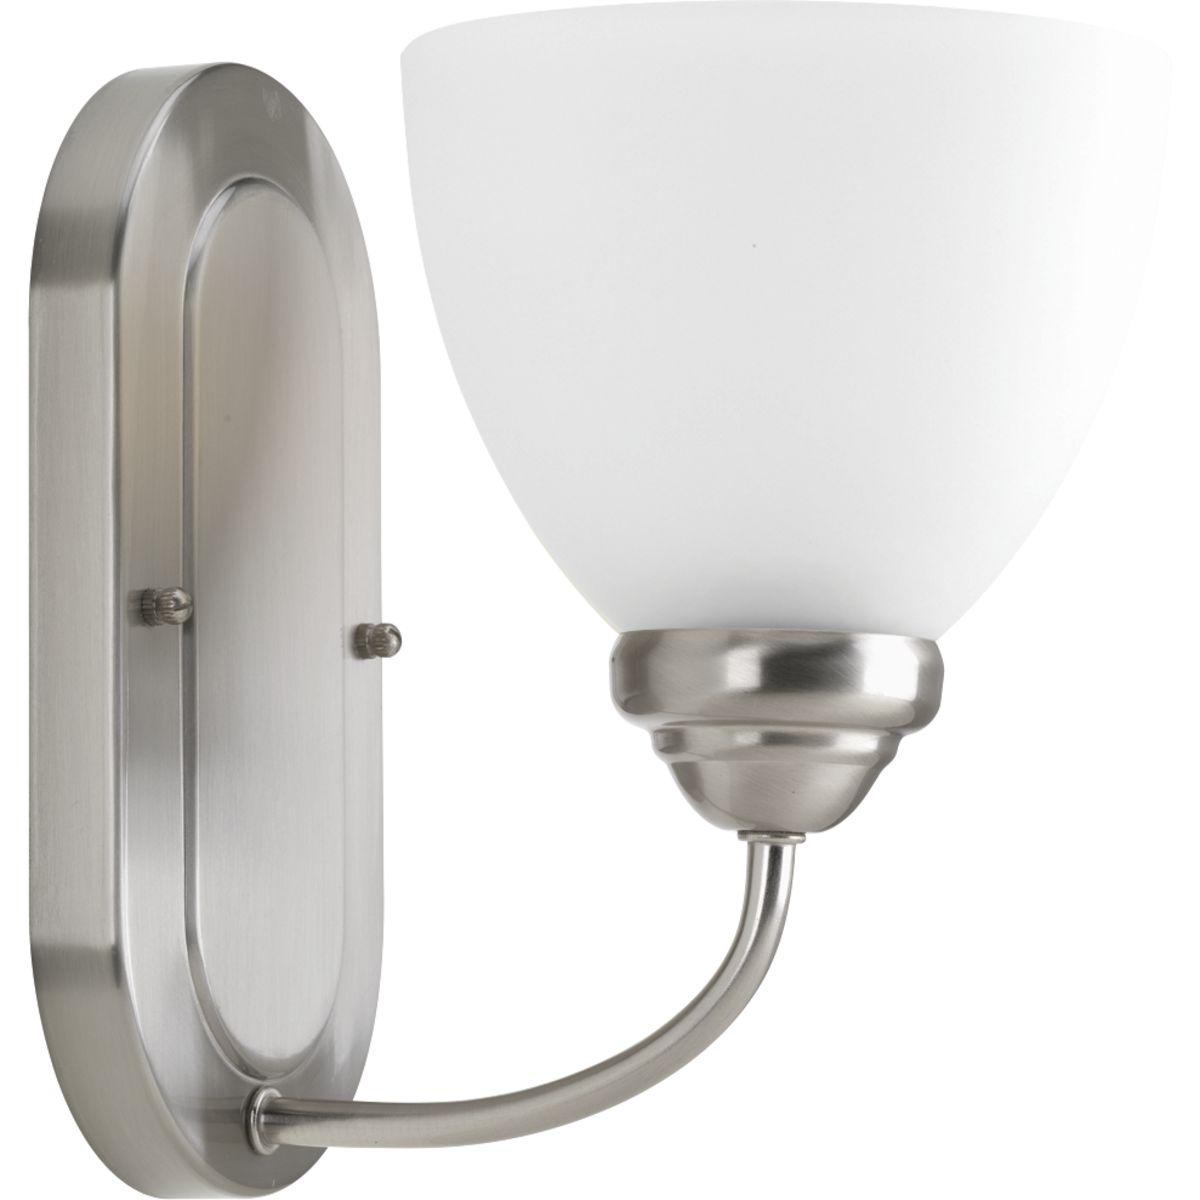 Hubbell P2913-09 The Heart Collection possesses a smart simplicity to complement today's home. This one-light bath bracket includes etched glass shades to add distinction and provide pleasing illumination to any room. Versatile design permits installation of fixture facin